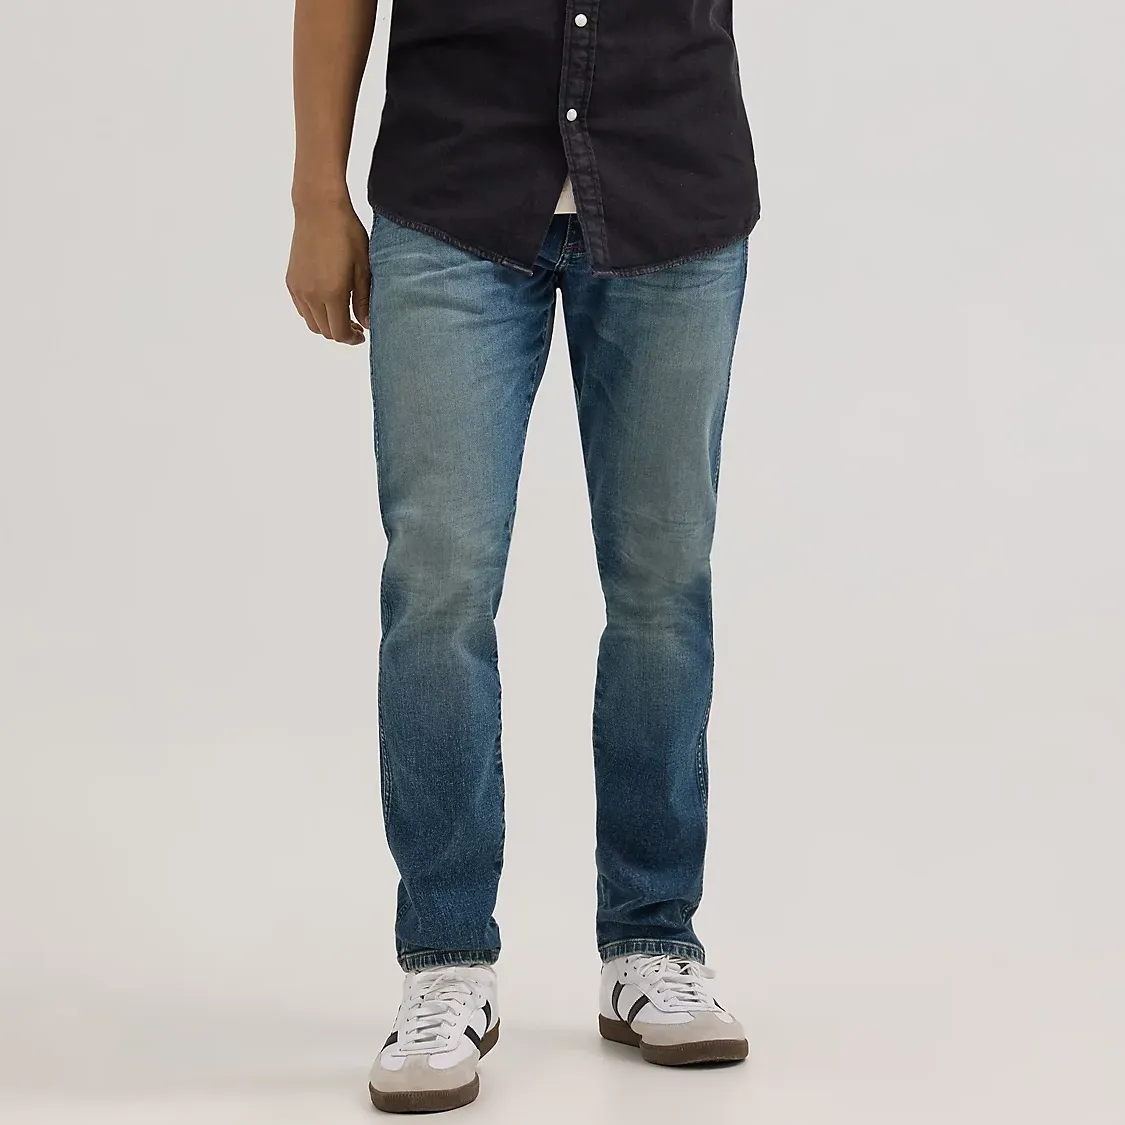 A person is wearing a black button-up shirt, faded blue jeans, and grey sneakers with white accents.